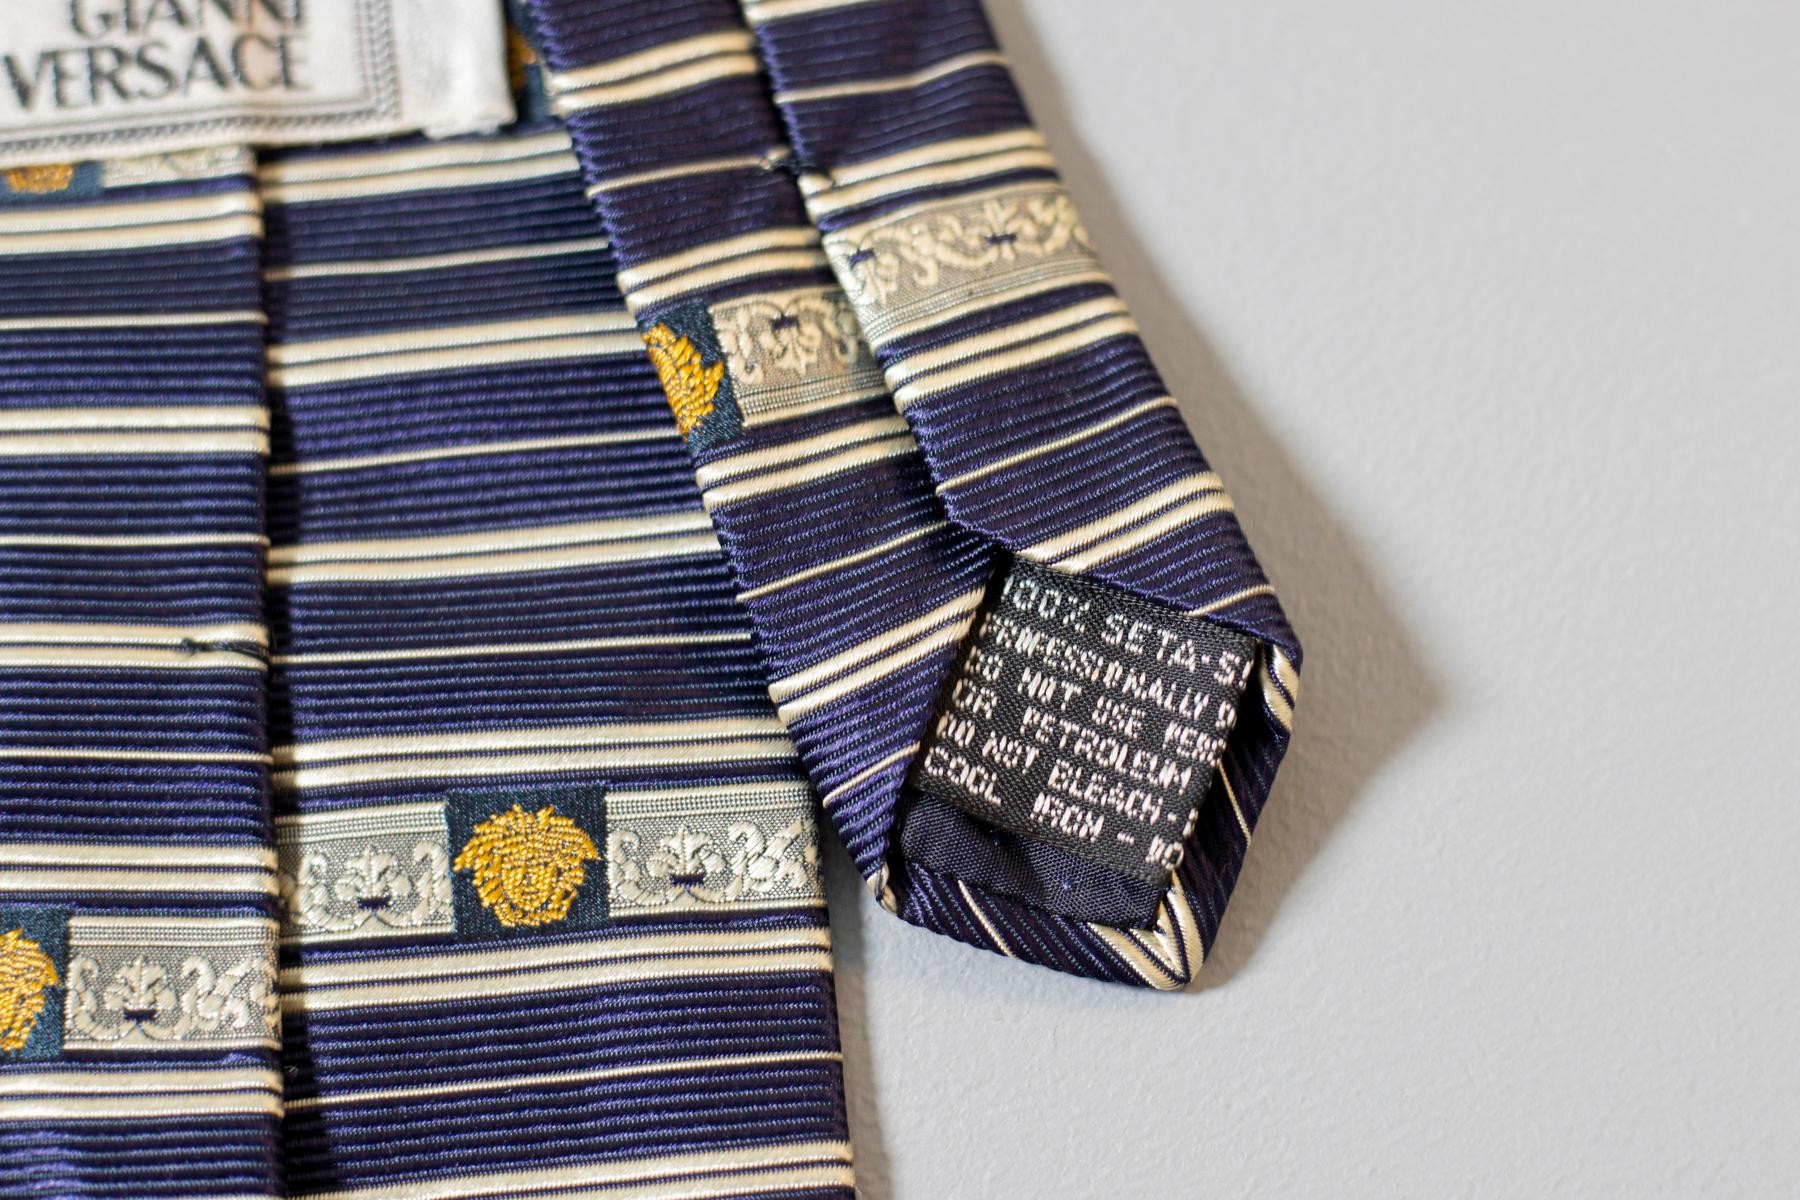 Vintage Gianni Versace all-silk striped tie For Sale 1